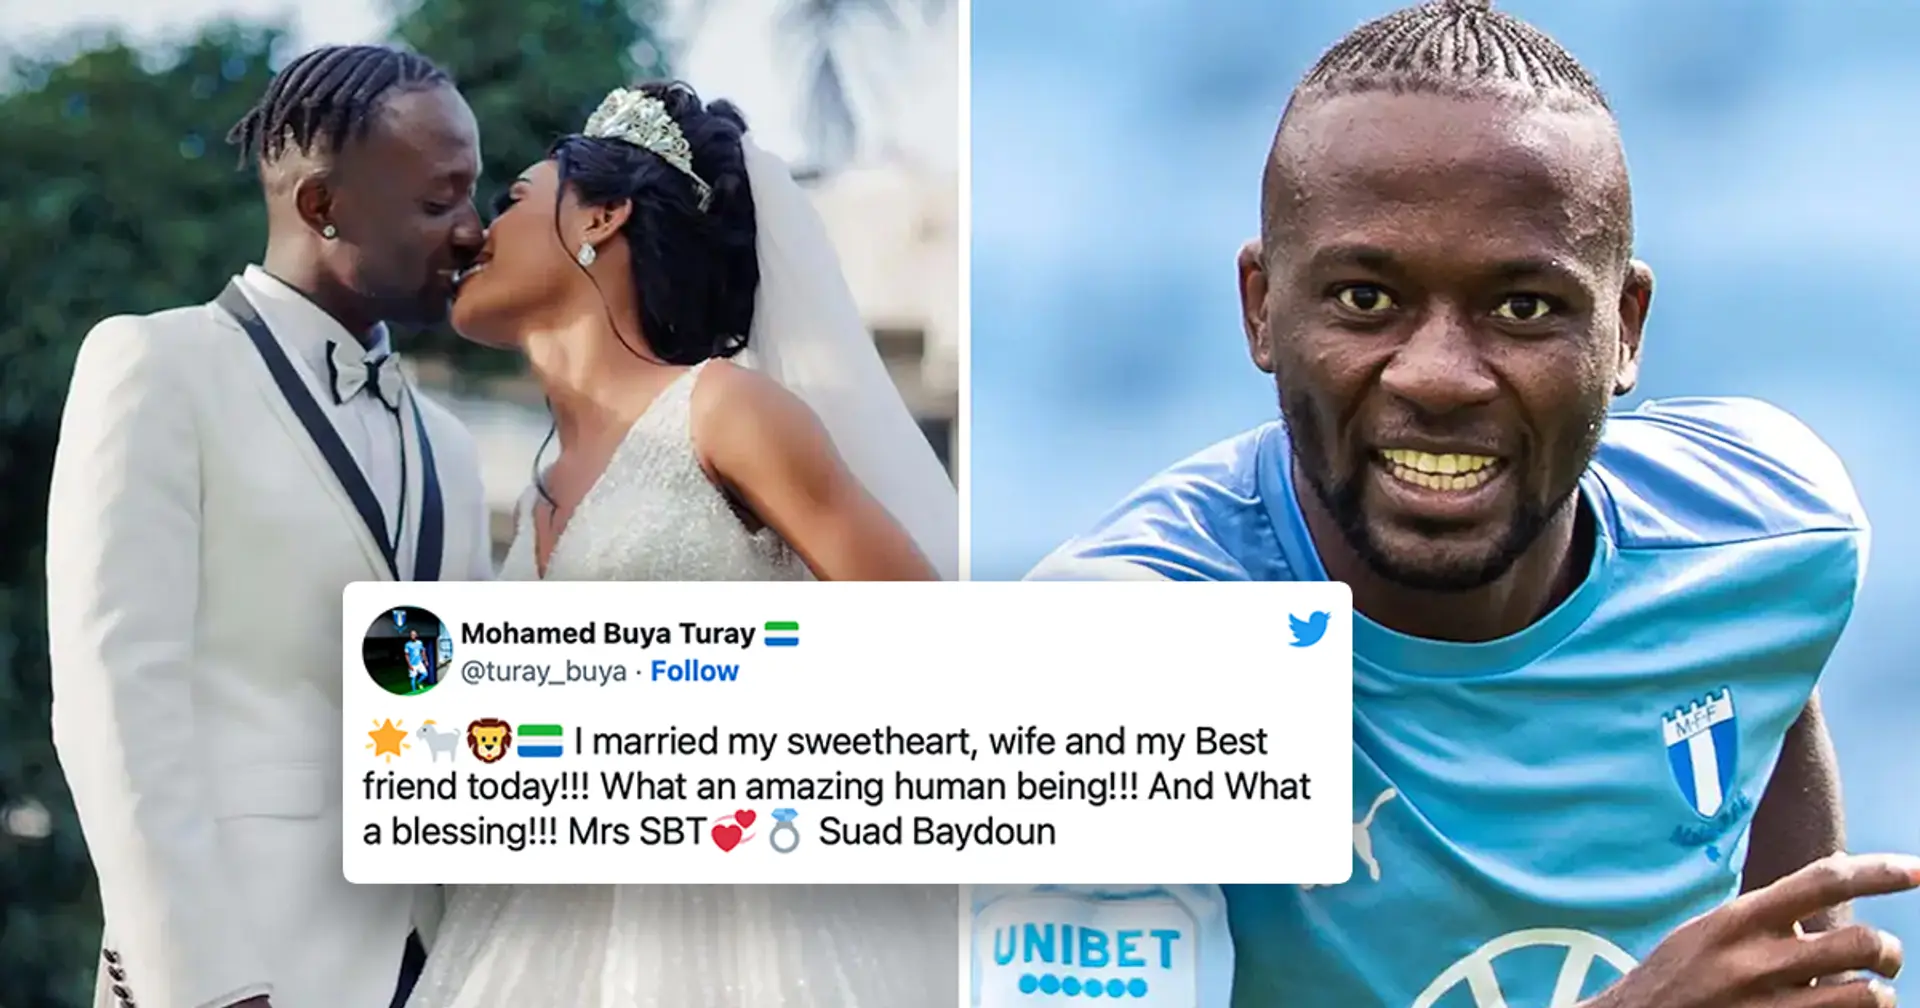 Malmo player Buya Turay missed his own wedding, asked his brother to replace him for the wedding ceremony